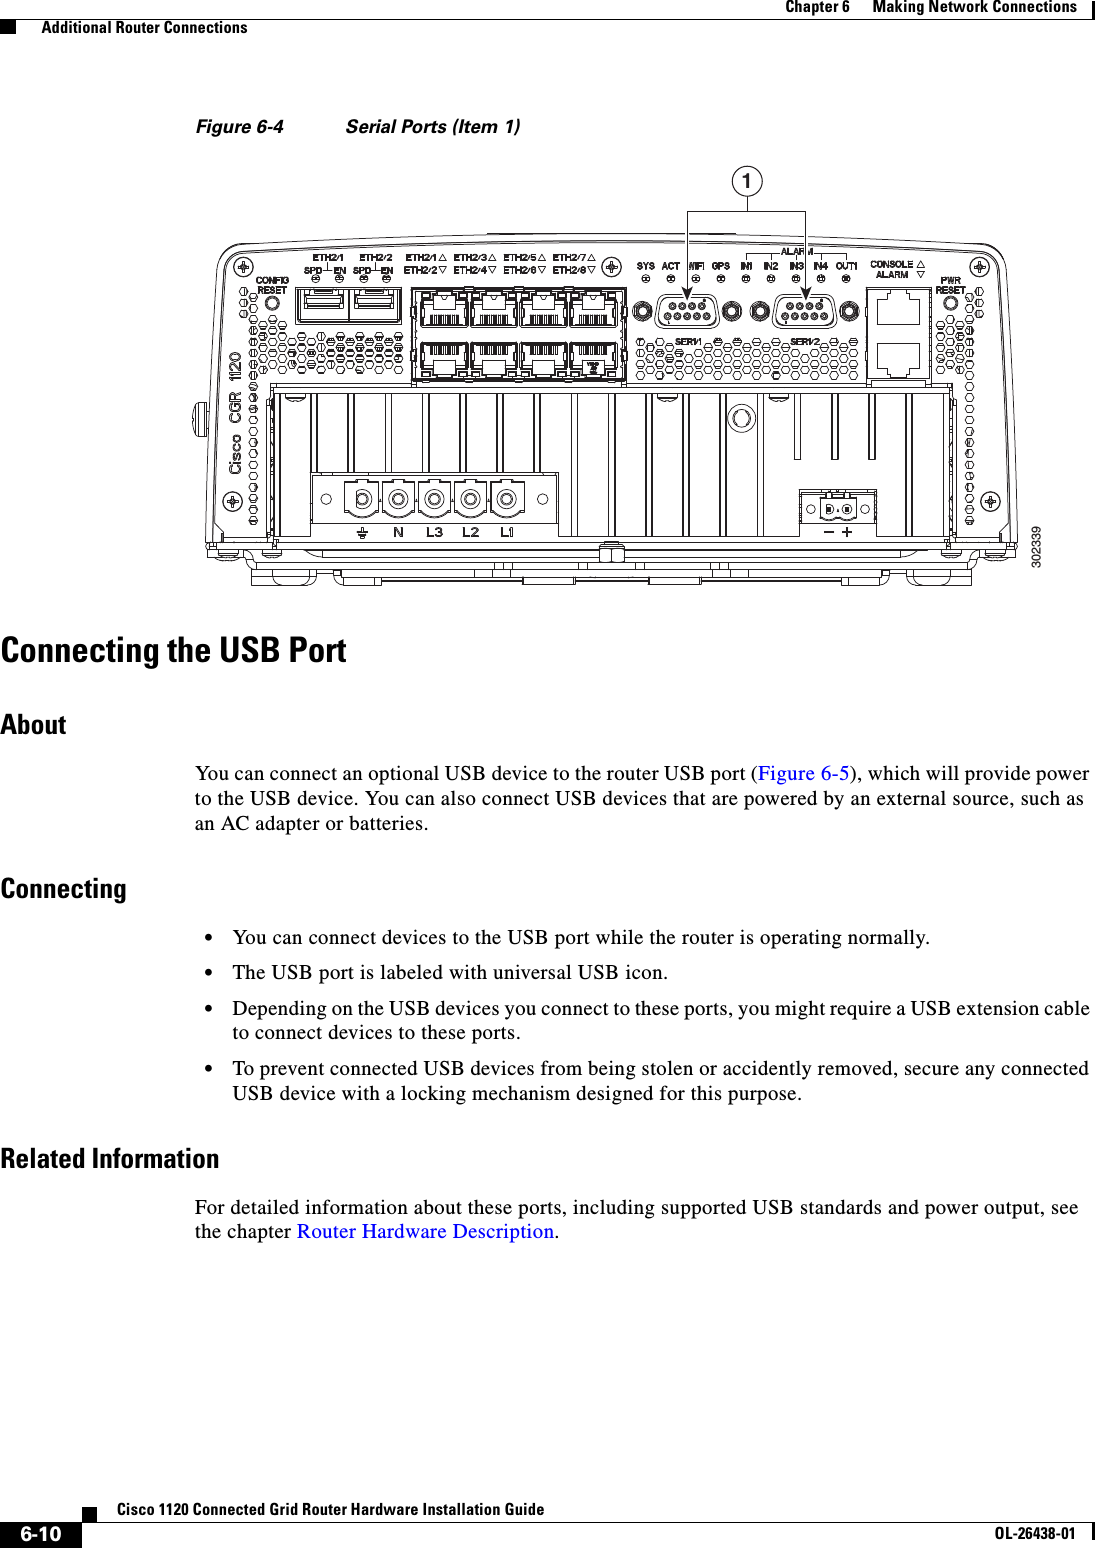  6-10Cisco 1120 Connected Grid Router Hardware Installation GuideOL-26438-01Chapter 6      Making Network Connections  Additional Router ConnectionsFigure 6-4 Serial Ports (Item 1)Connecting the USB PortAboutYou can connect an optional USB device to the router USB port (Figure 6-5), which will provide power to the USB device. You can also connect USB devices that are powered by an external source, such as an AC adapter or batteries.Connecting•You can connect devices to the USB port while the router is operating normally.•The USB port is labeled with universal USB icon.•Depending on the USB devices you connect to these ports, you might require a USB extension cable to connect devices to these ports.•To prevent connected USB devices from being stolen or accidently removed, secure any connected USB device with a locking mechanism designed for this purpose.Related InformationFor detailed information about these ports, including supported USB standards and power output, see the chapter Router Hardware Description.3023391